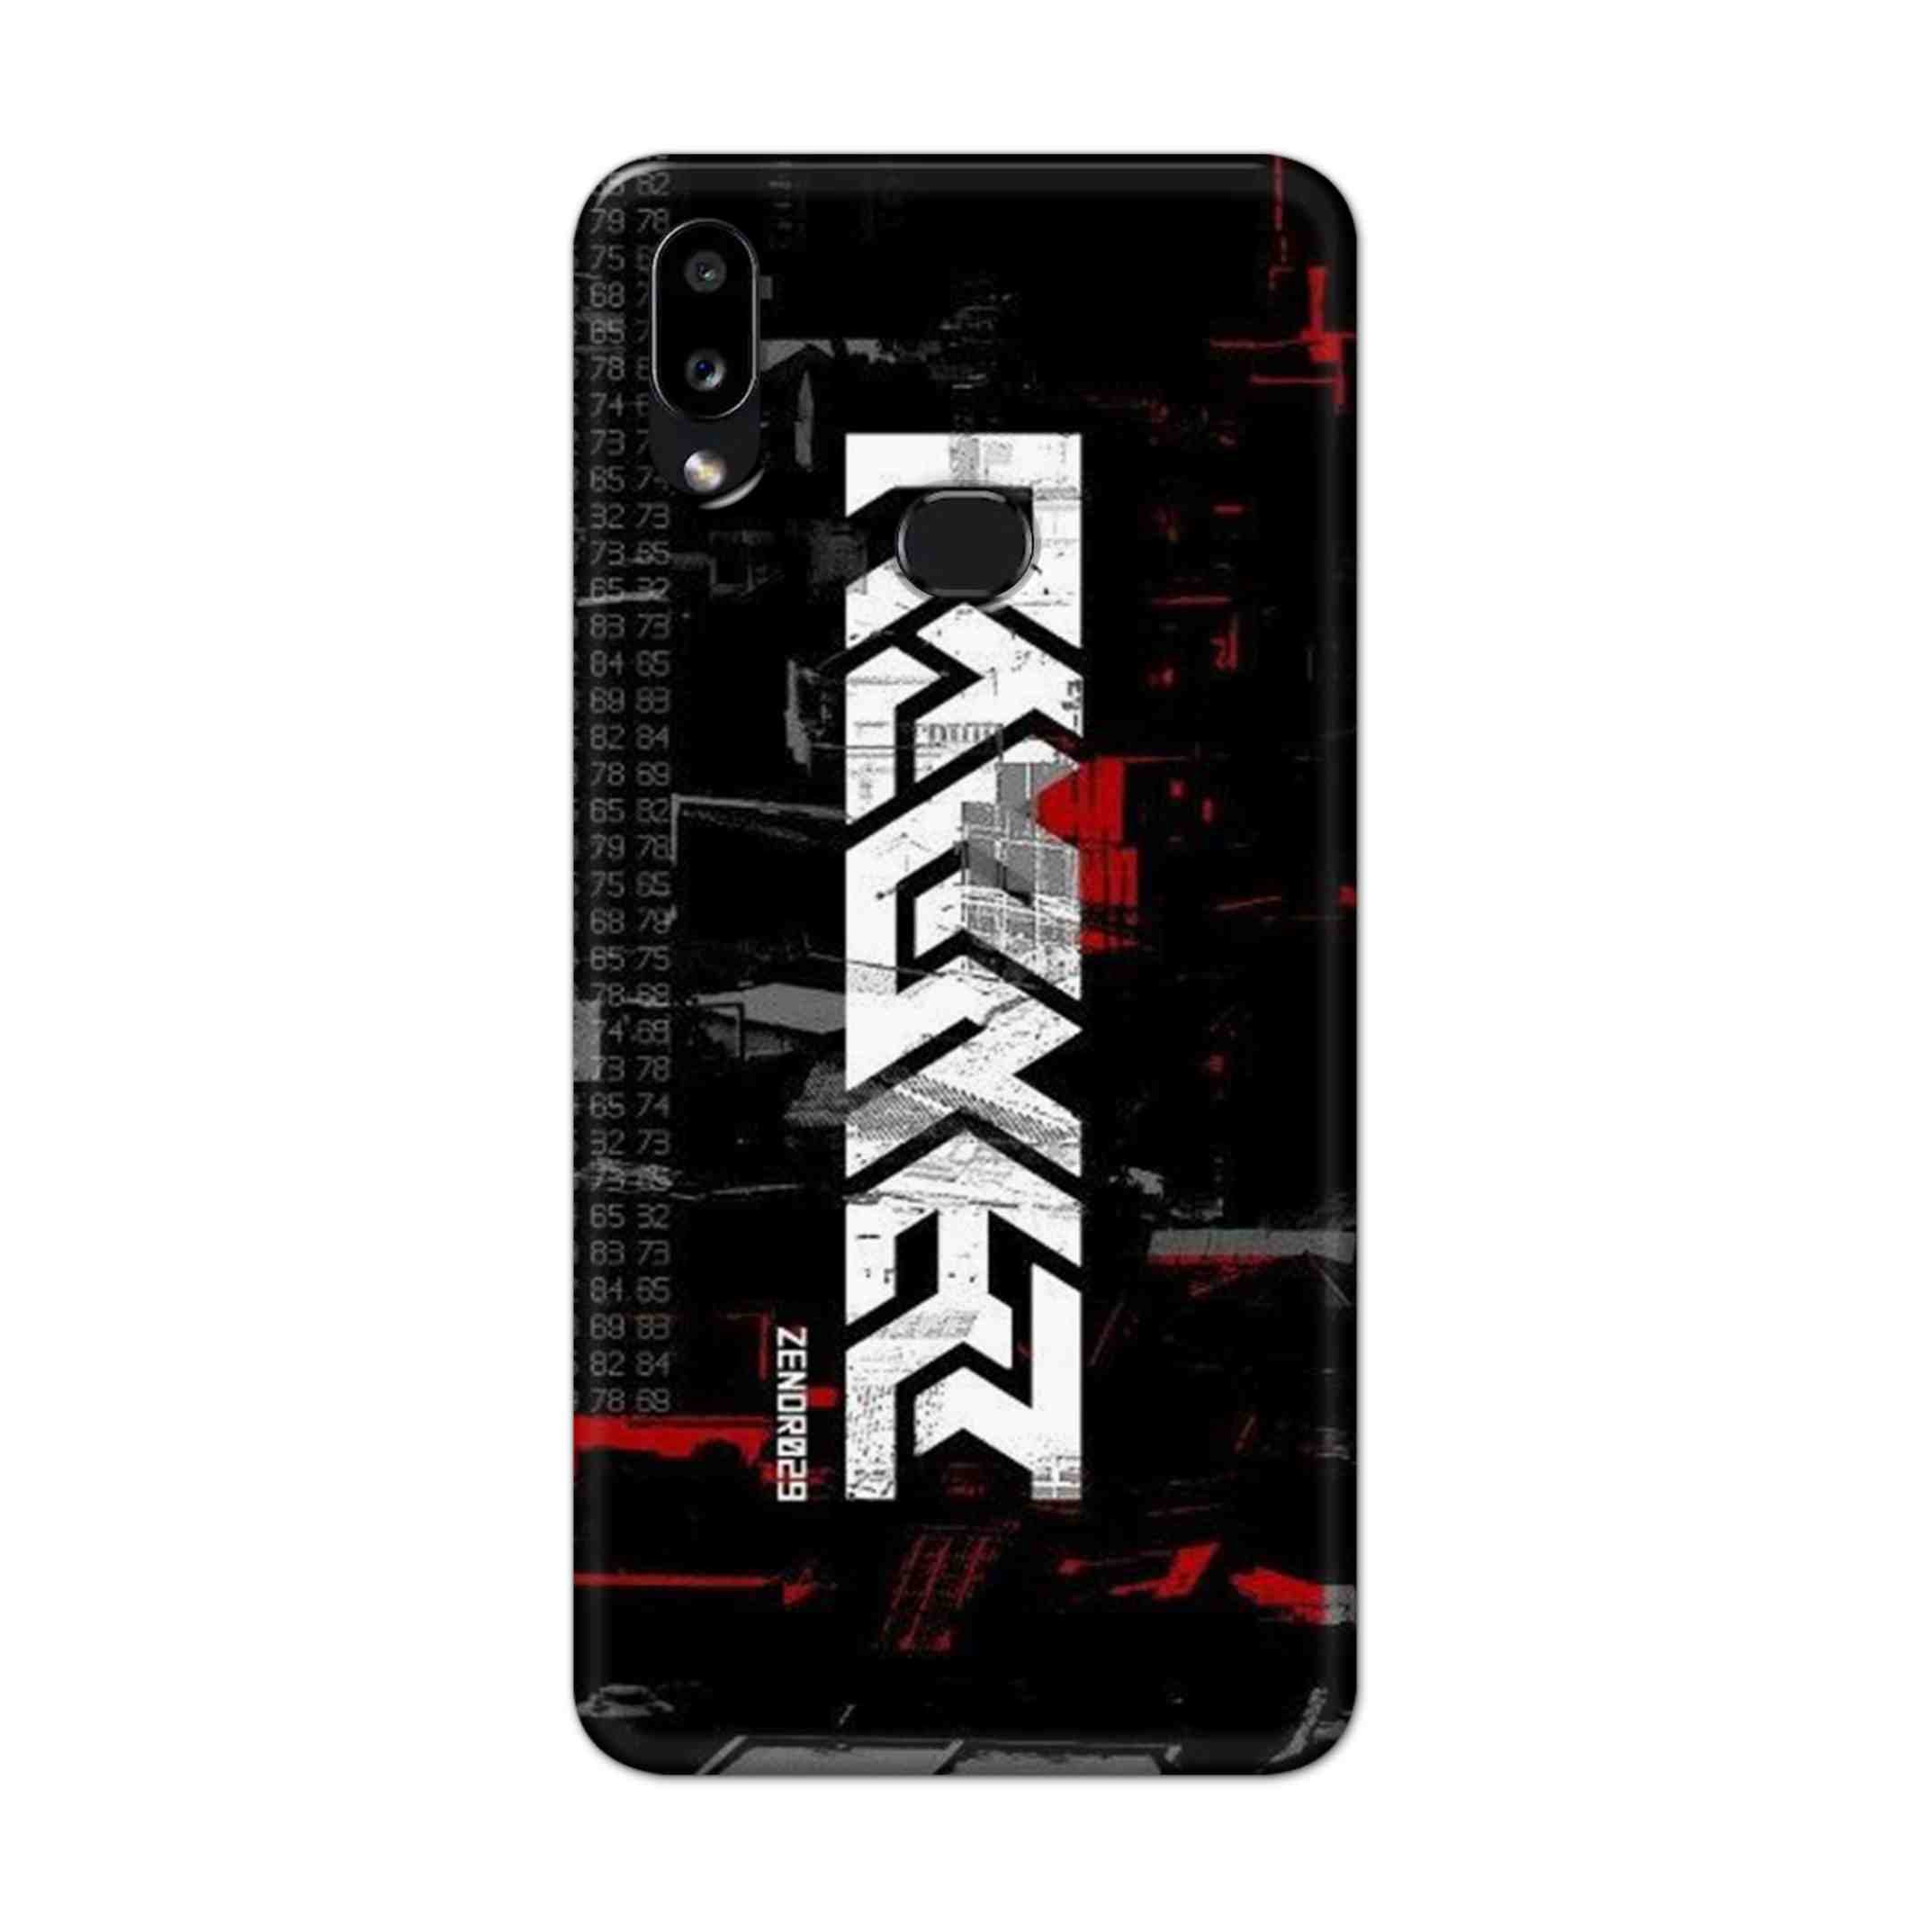 Buy Raxer Hard Back Mobile Phone Case Cover For Samsung Galaxy M01s Online